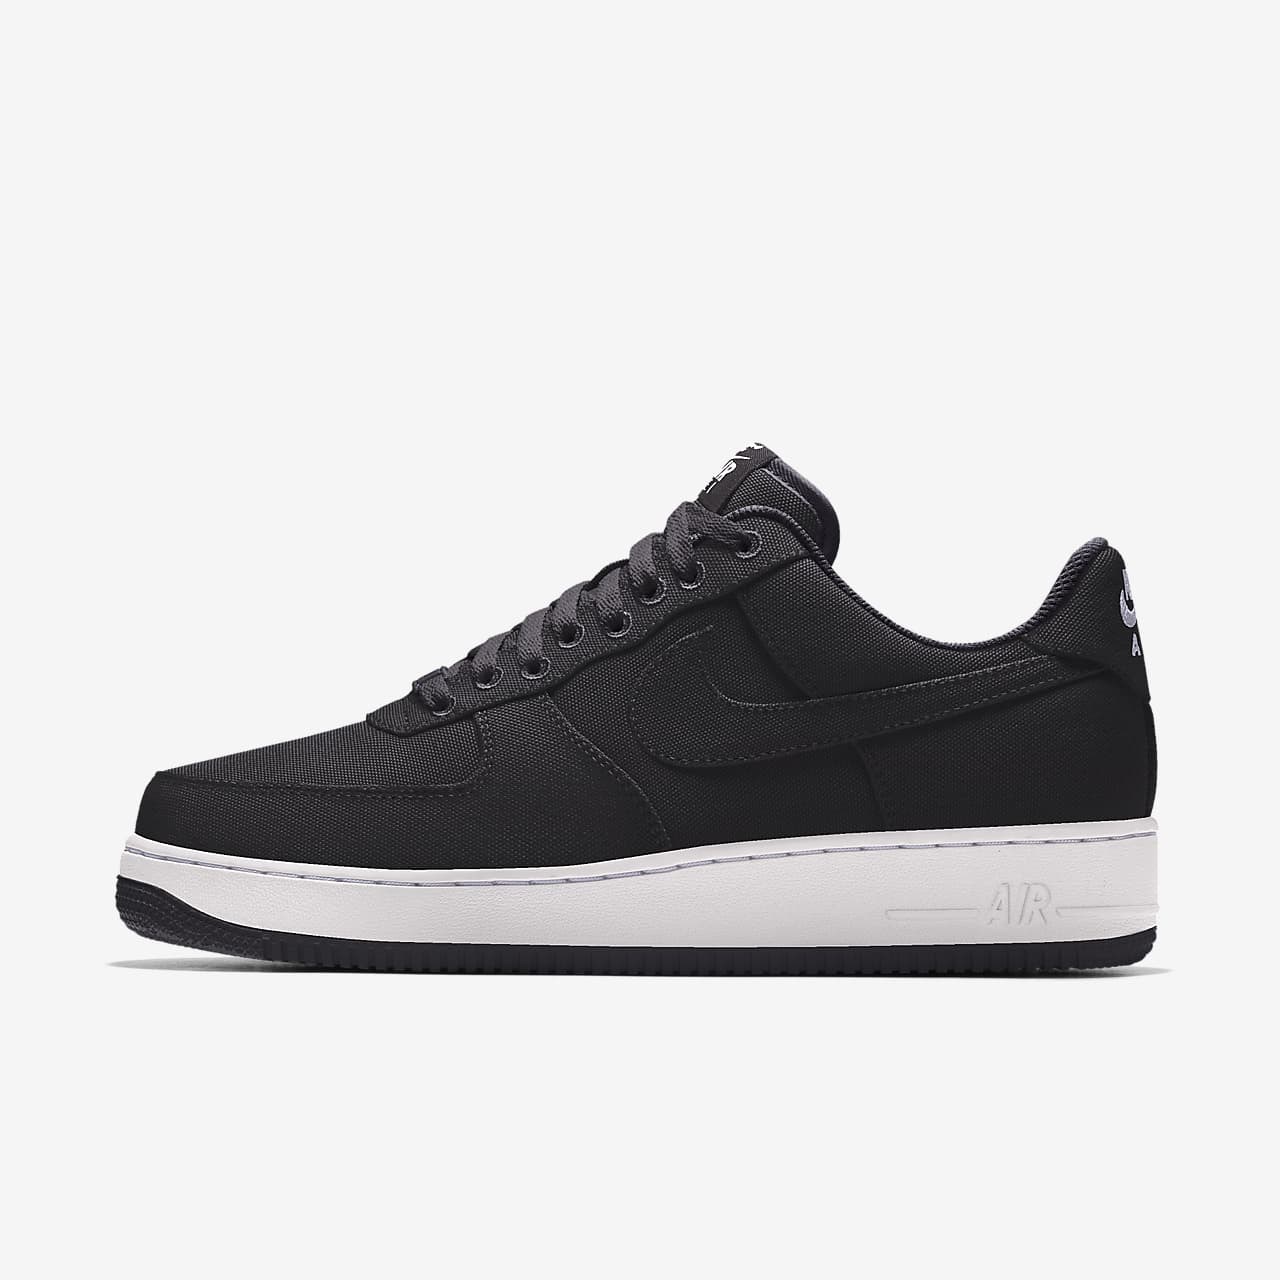 Scarpa personalizzabile Nike Air Force 1 Low By You - Uomo